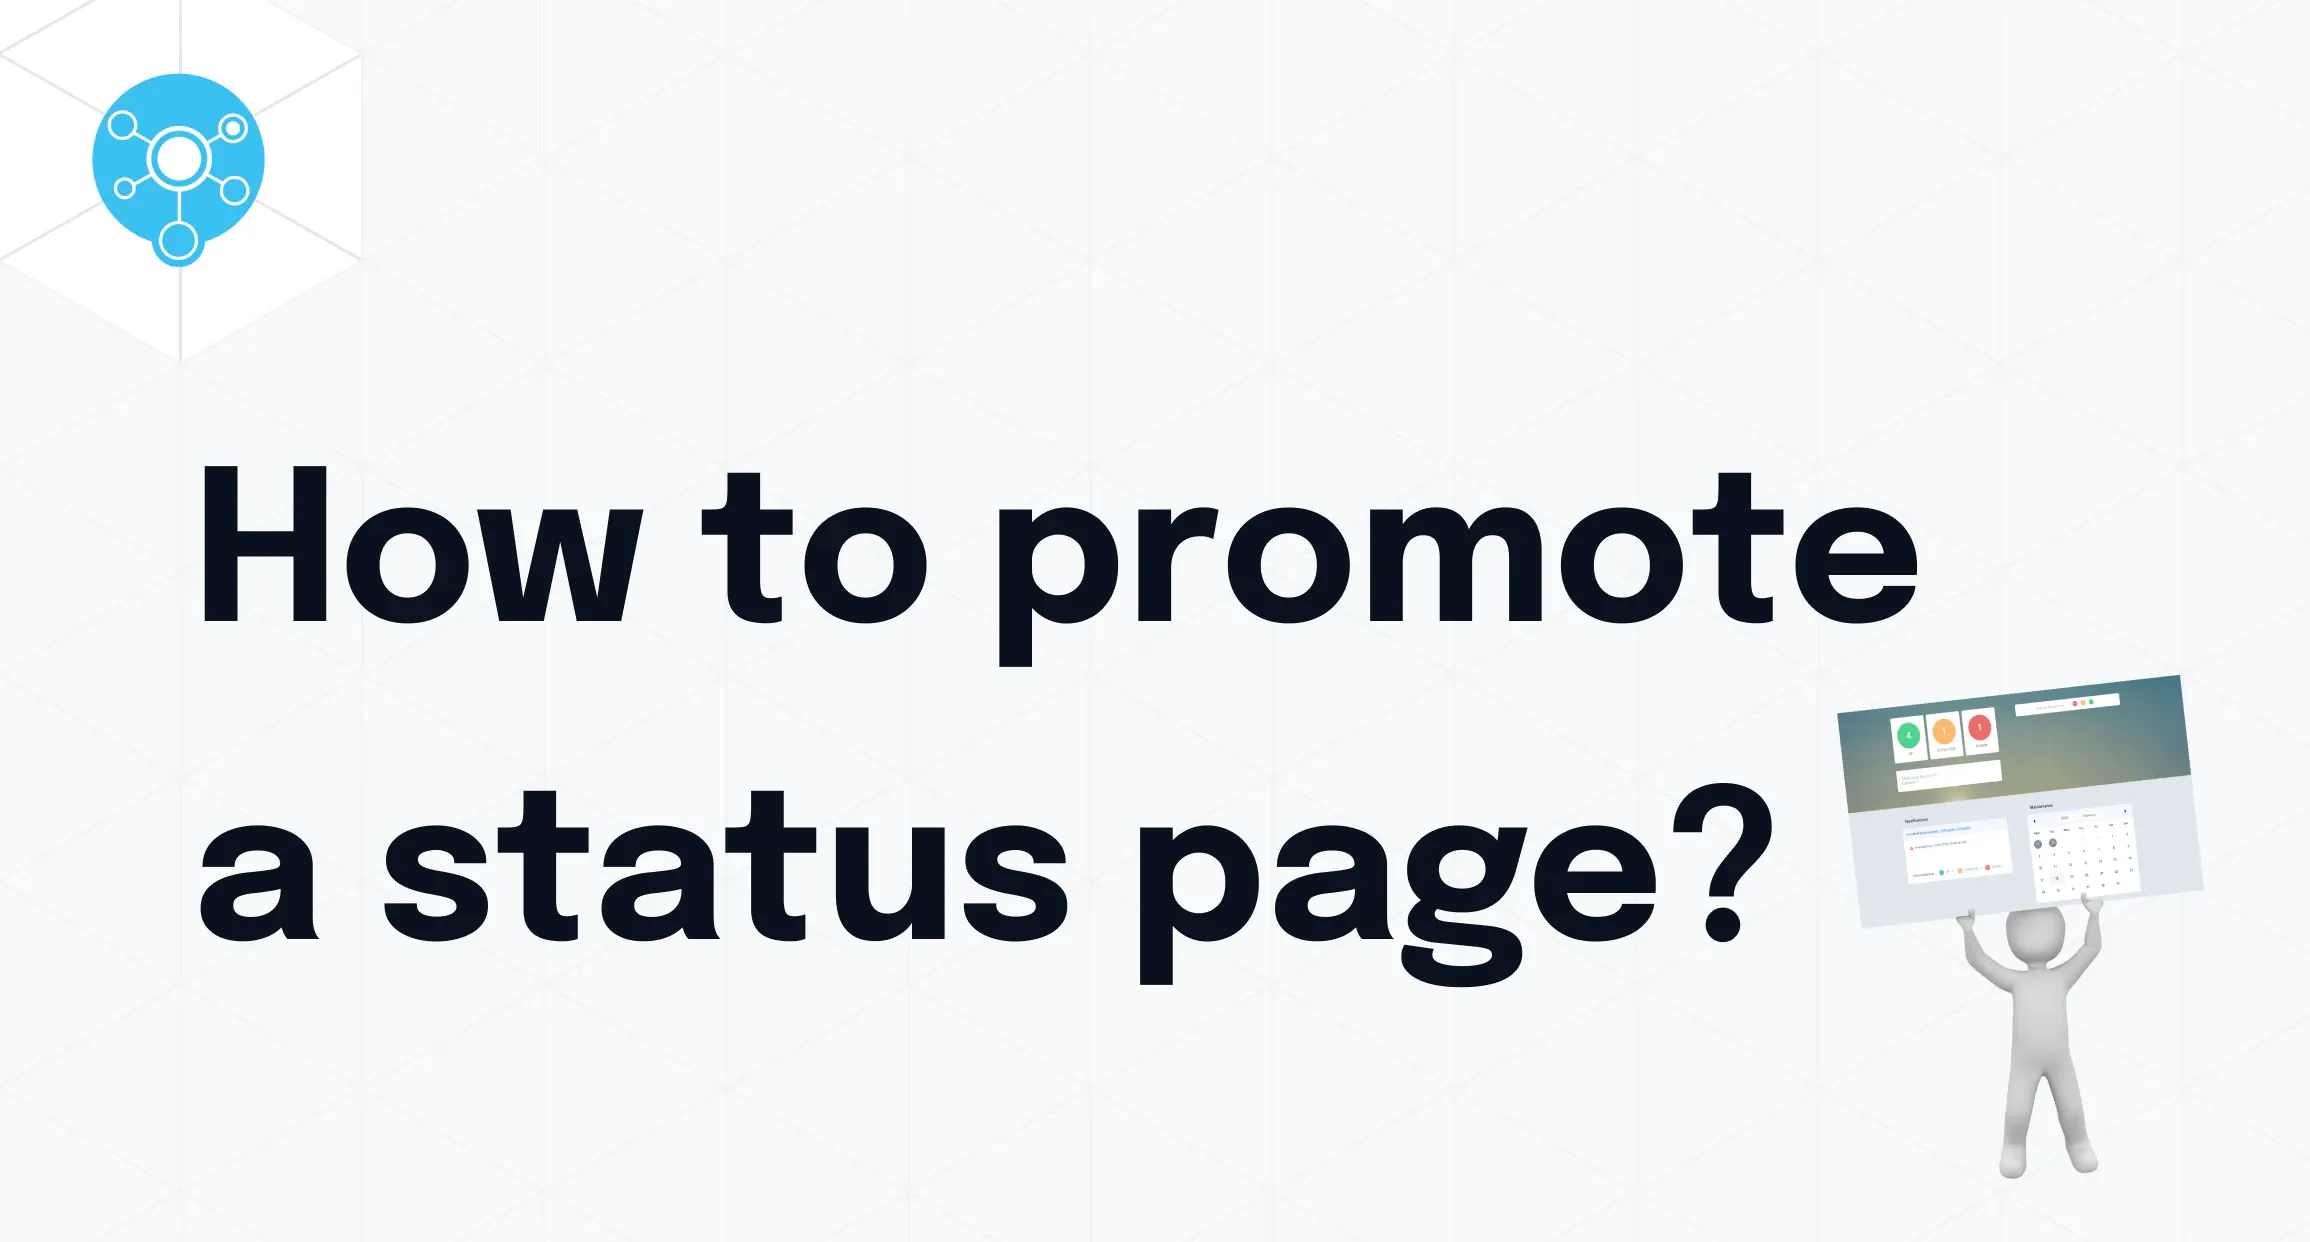 Promote a status page to your customers